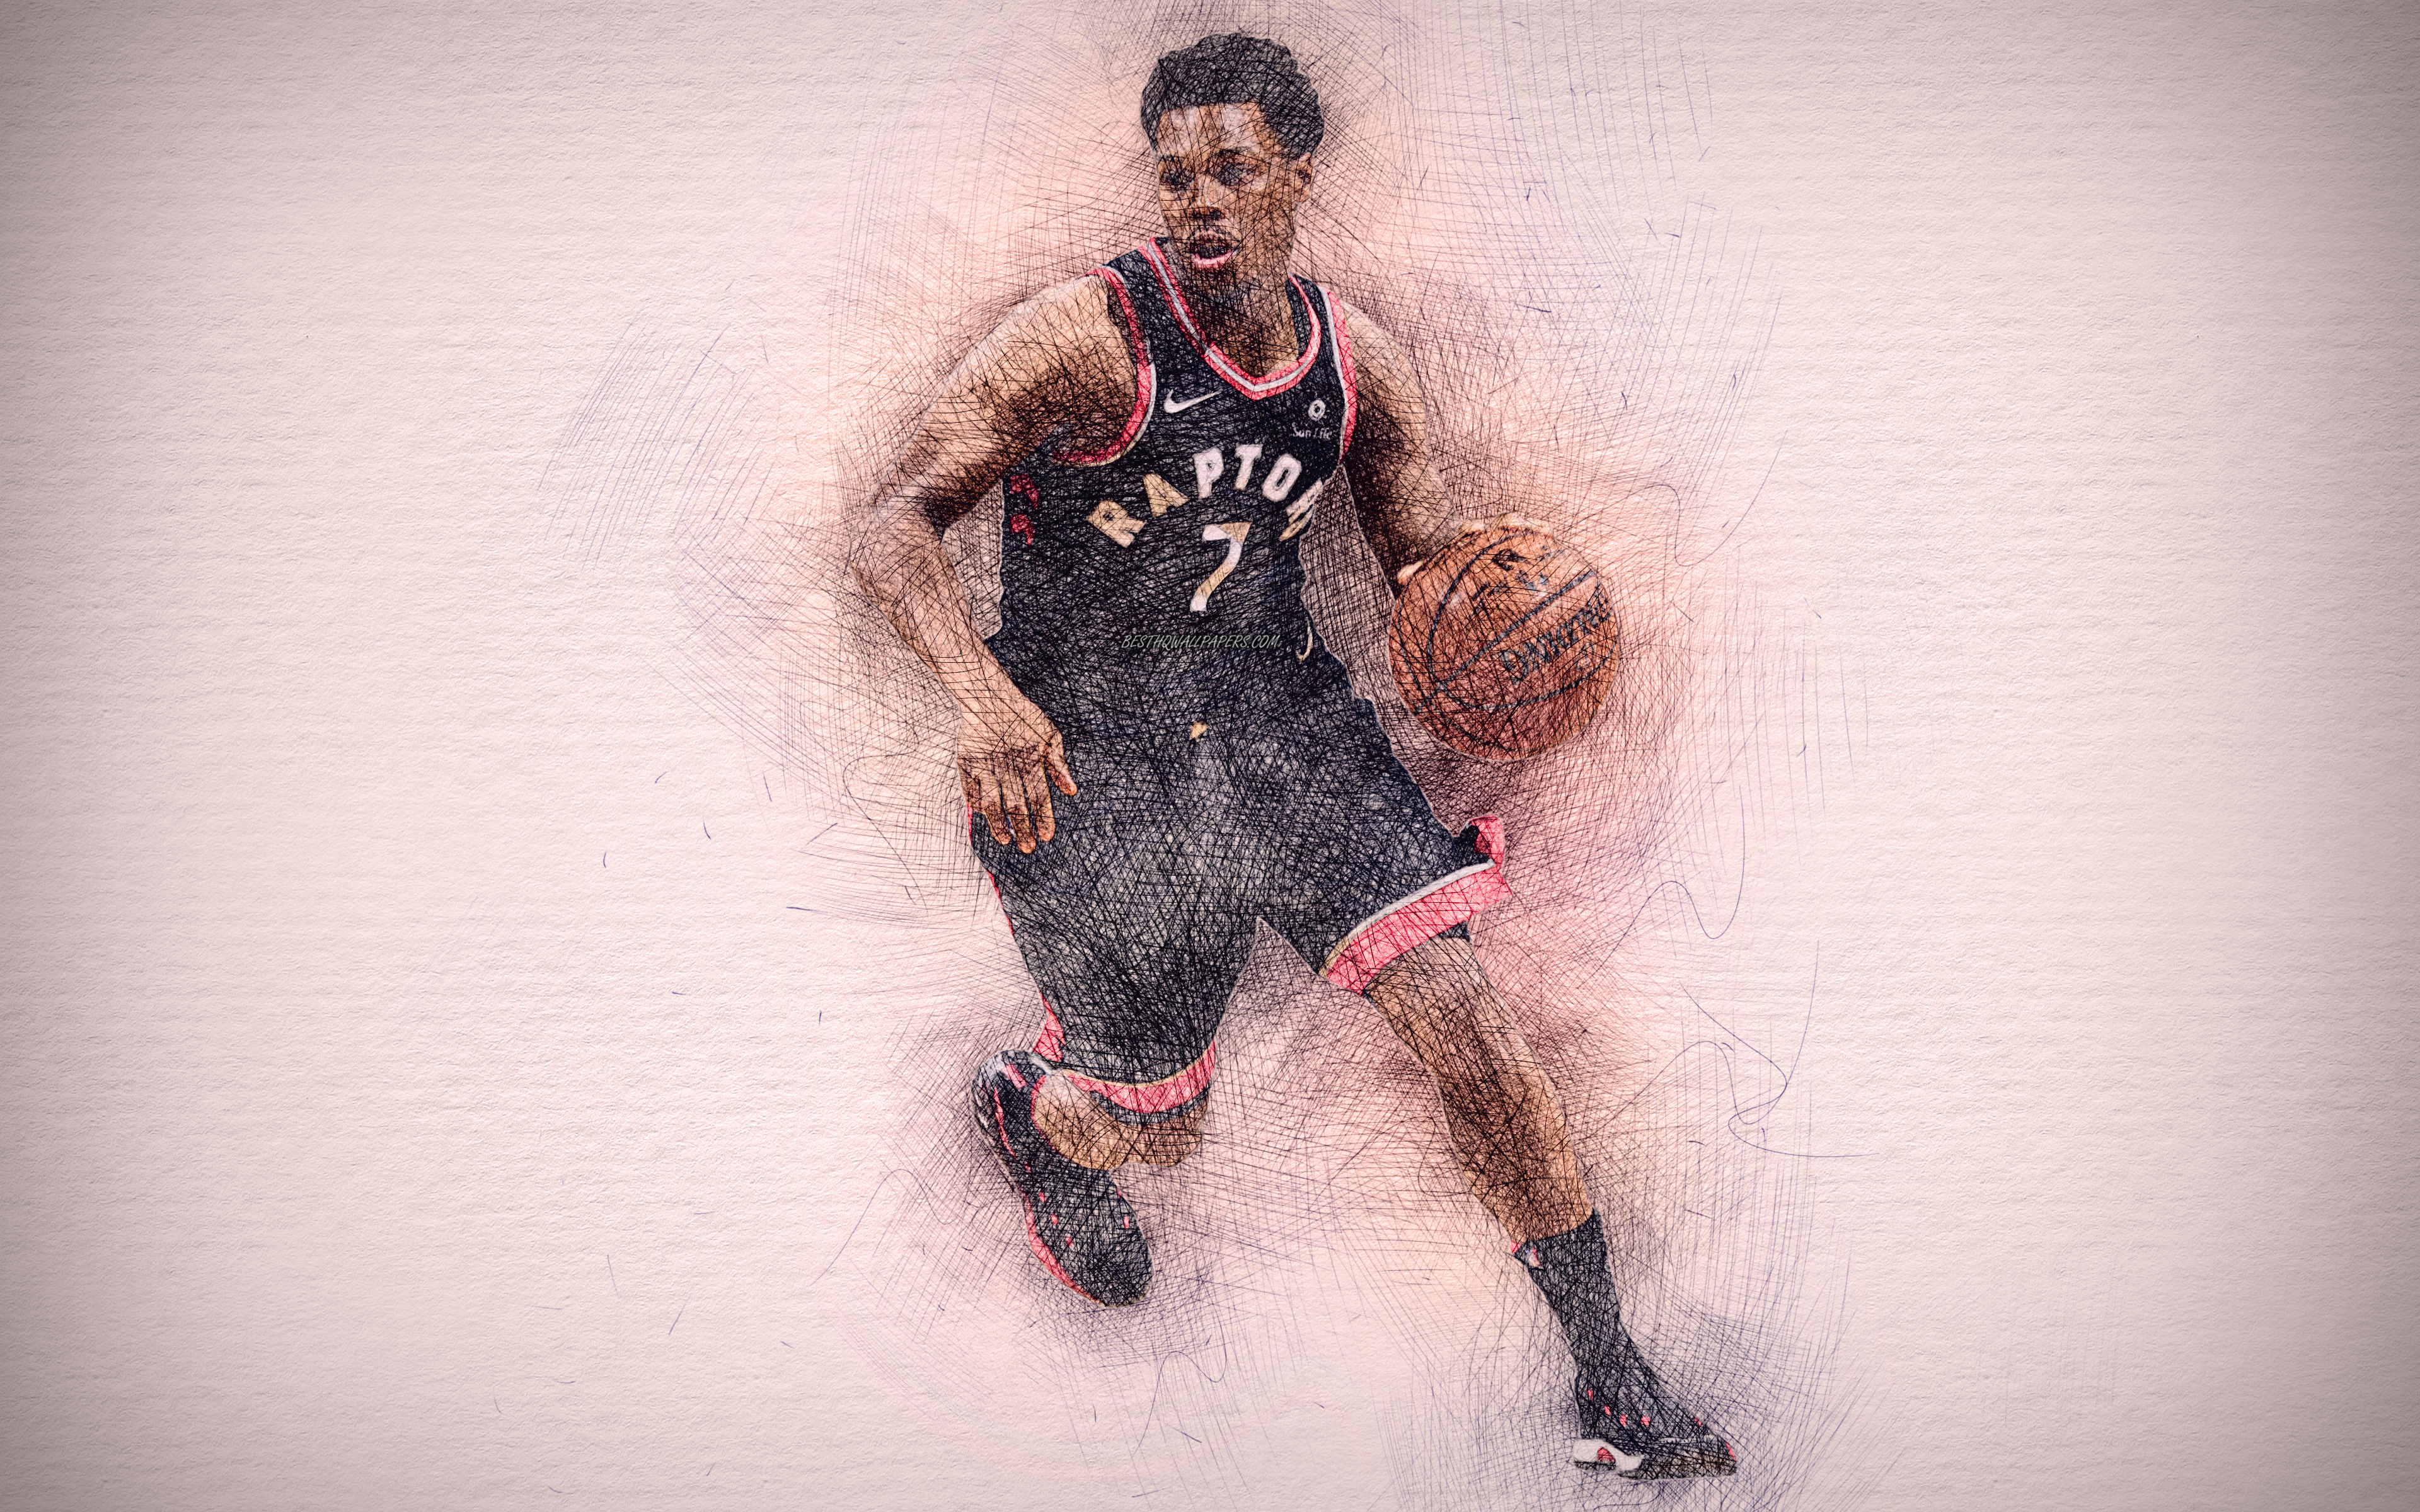 Download wallpaper Kyle Lowry, 4k, artwork, basketball stars, Toronto Raptors, NBA, basketball, drawing Kyle Lowry for desktop with resolution 3840x2400. High Quality HD picture wallpaper